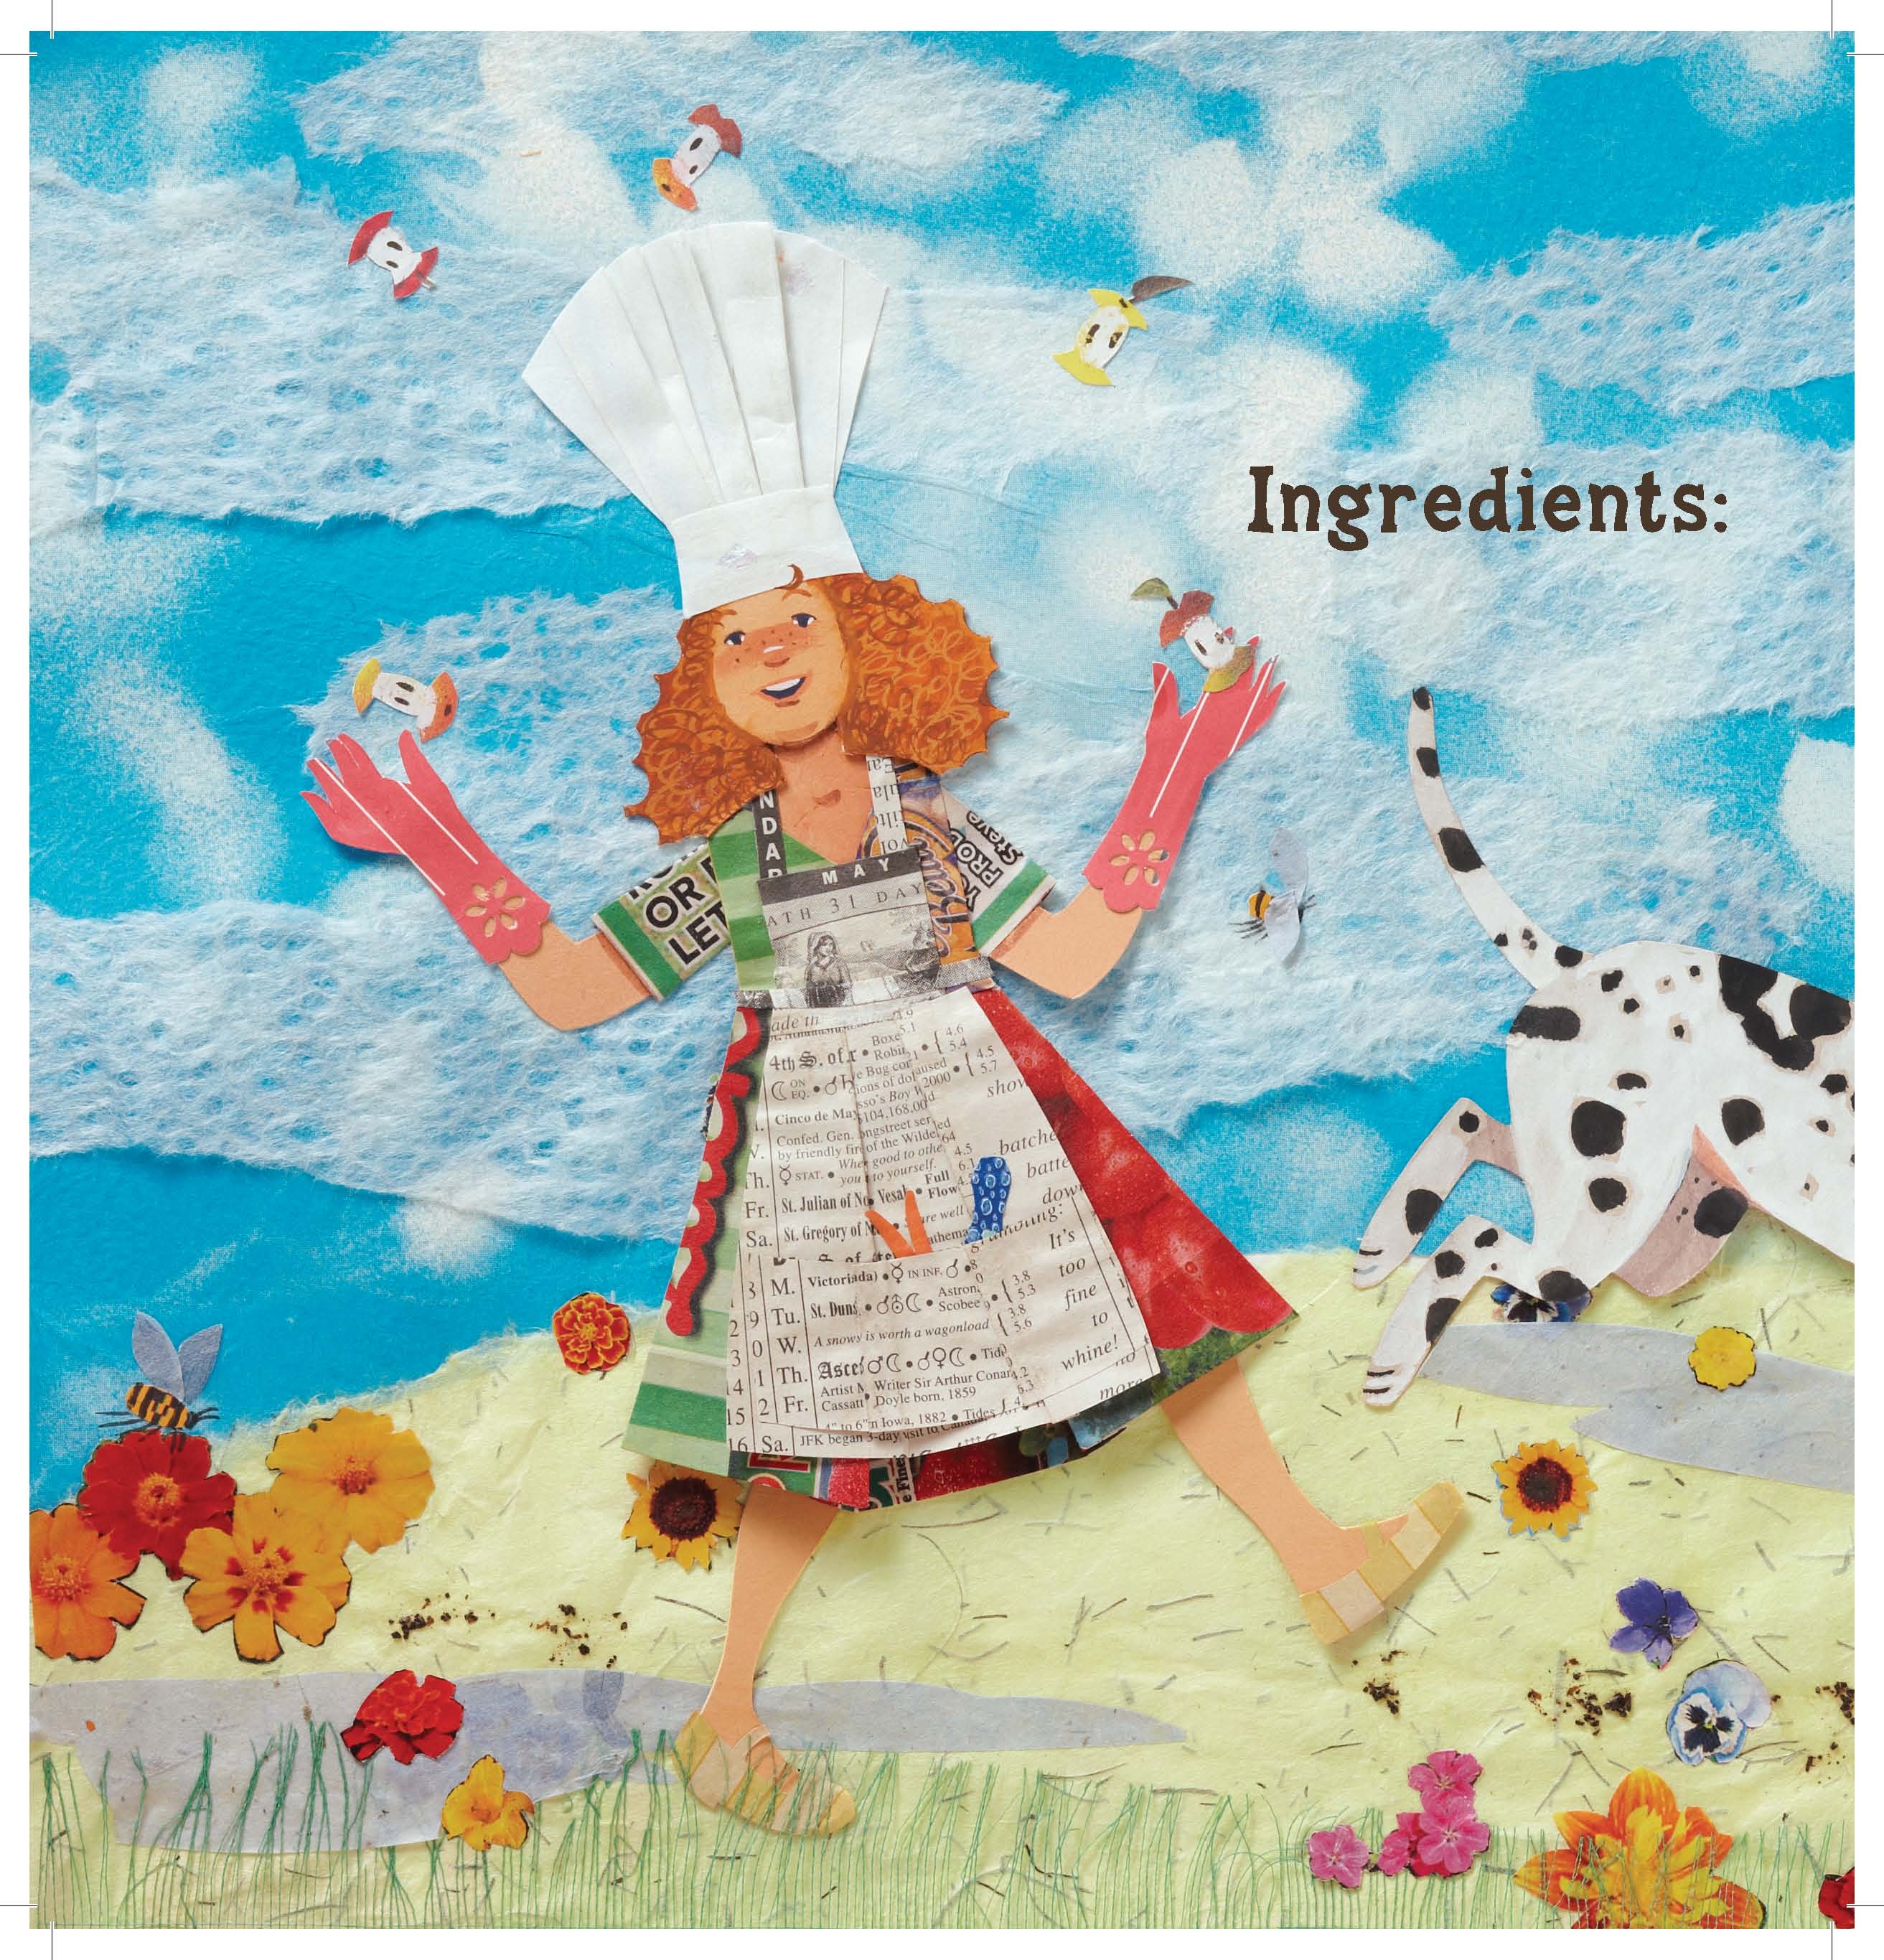 Compost Stew by Mary McKenna Siddals Book Review Rhyme